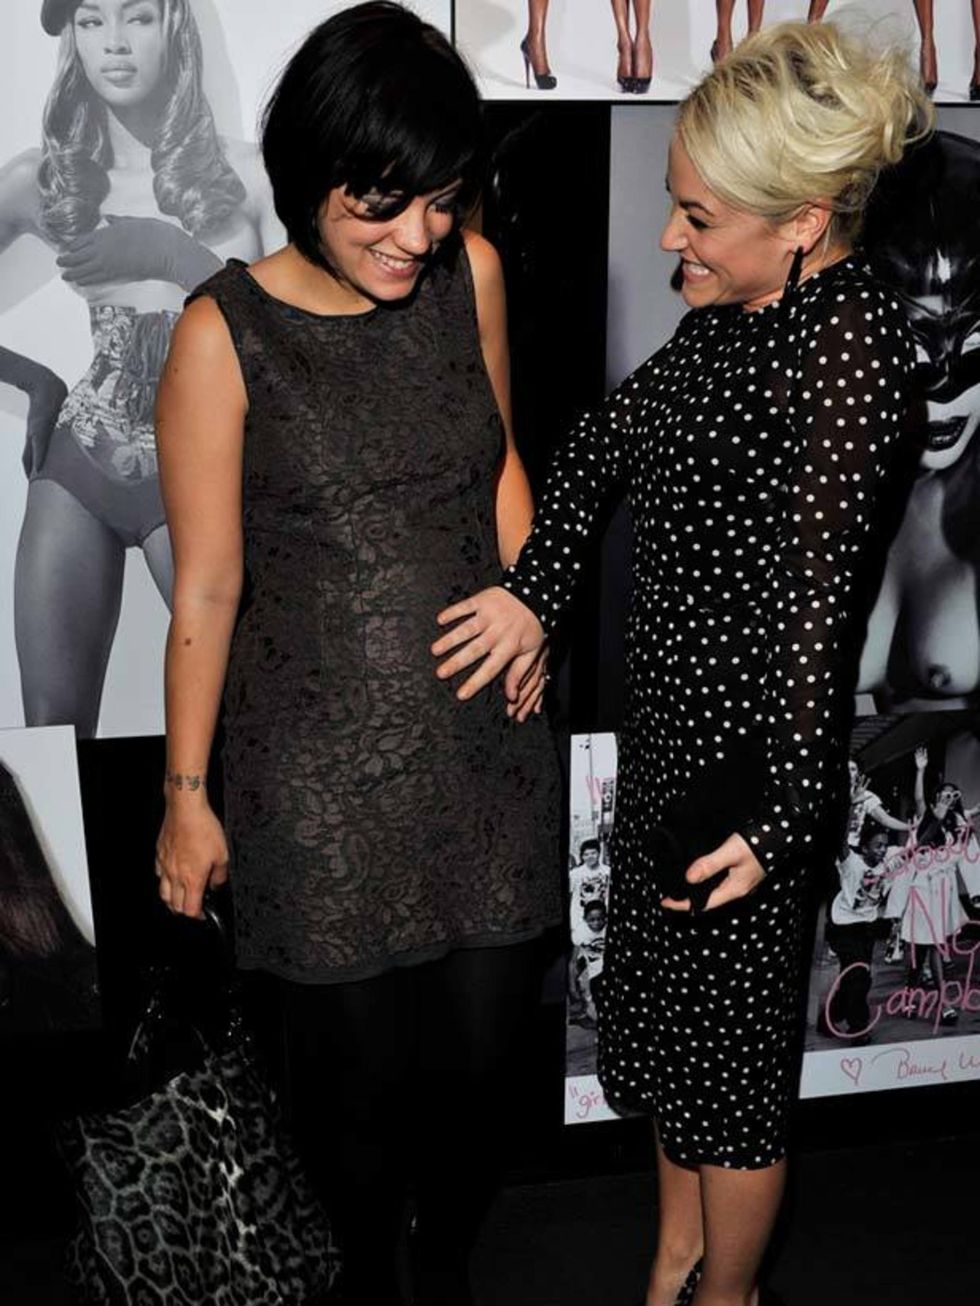 <p><a href="http://www.elleuk.com/starstyle/style-files/%28section%29/lily-allen/%28offset%29/12/%28img%29/338898"> Lily Allen</a> &amp; <a href="http://www.elleuk.com/starstyle/style-files/%28section%29/jaime-winstone/%28offset%29/0/%28img%29/181251">Jam